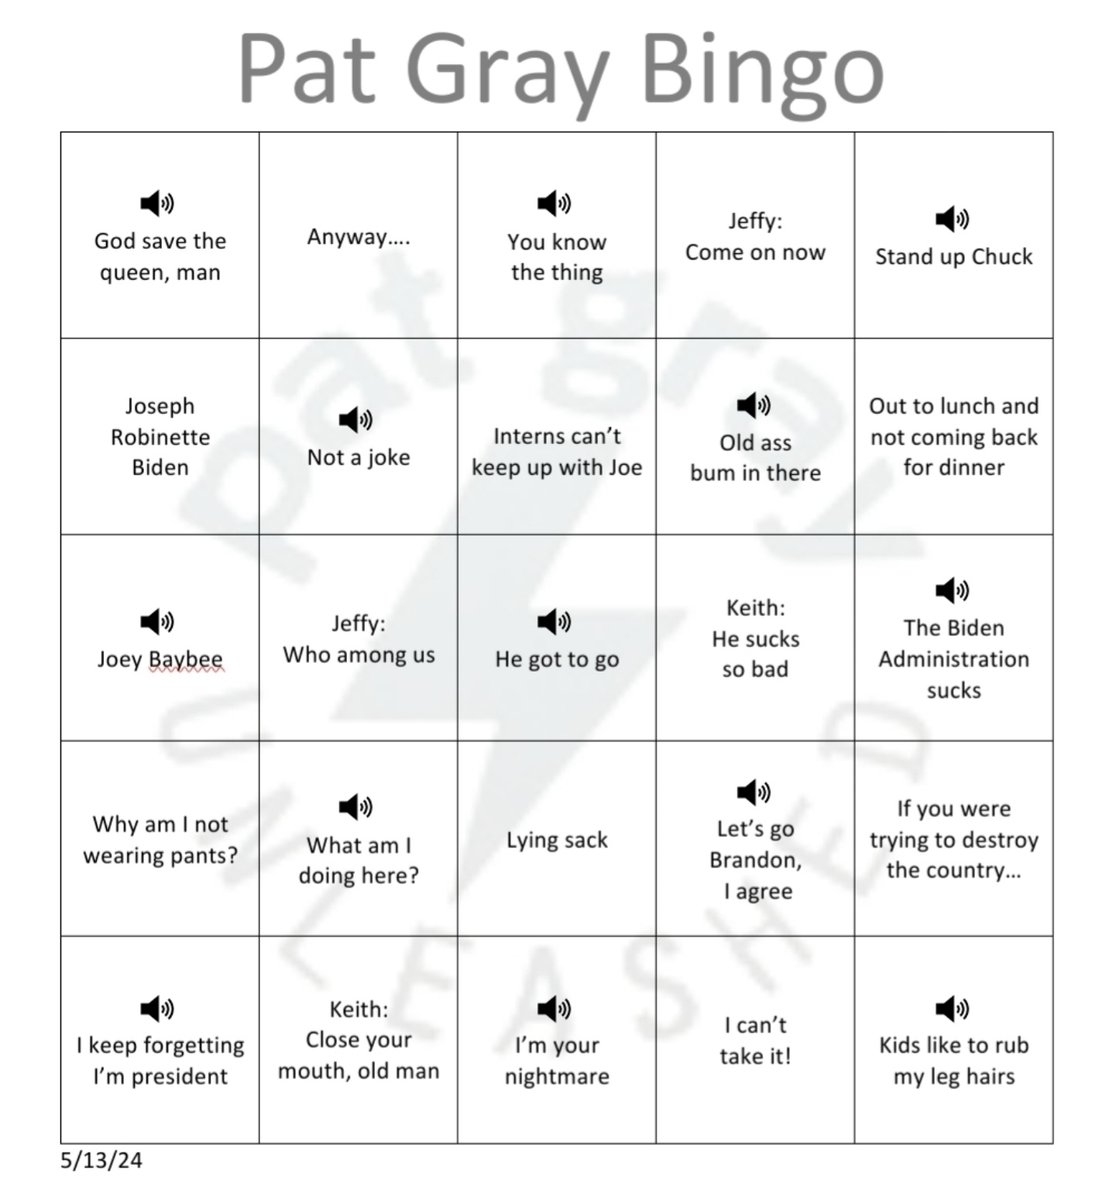 Here's your Joe Biden themed #PatGrayBingo card for the week of 5/13! Tune in to @PatUnleashed starting at 7am eastern on @theblaze/@BlazeTV! Thanks for thus very unique week, @Just2Mucknfutch! 🤣🤣🤣 Call 888-900-3393 when you get a BINGO this coming week! #PutThatInYourPipe